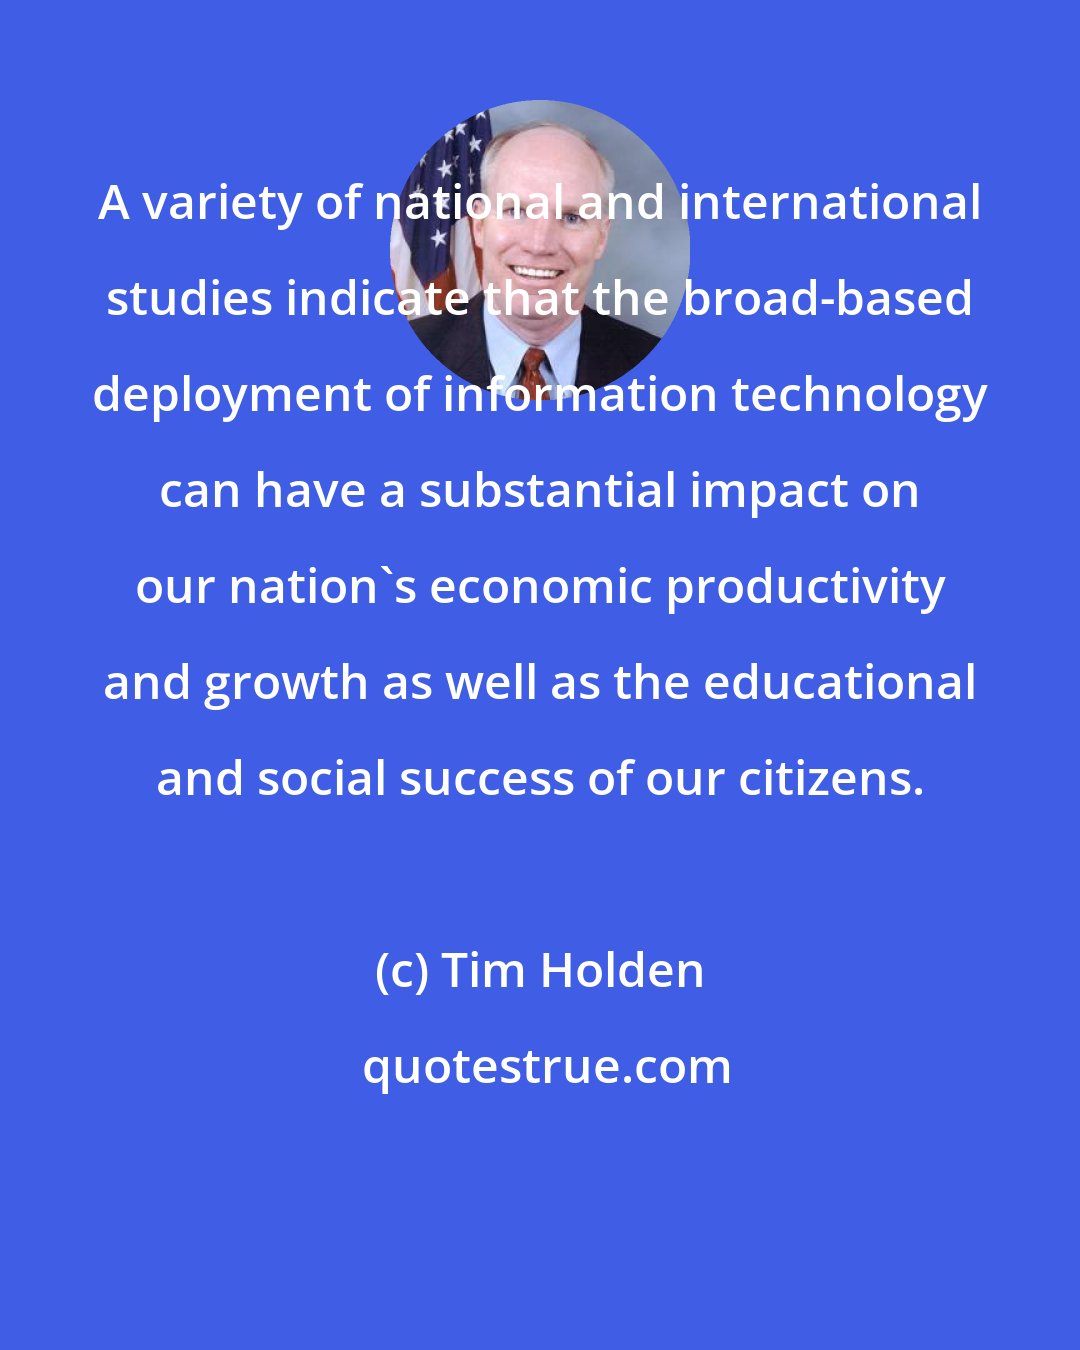 Tim Holden: A variety of national and international studies indicate that the broad-based deployment of information technology can have a substantial impact on our nation's economic productivity and growth as well as the educational and social success of our citizens.